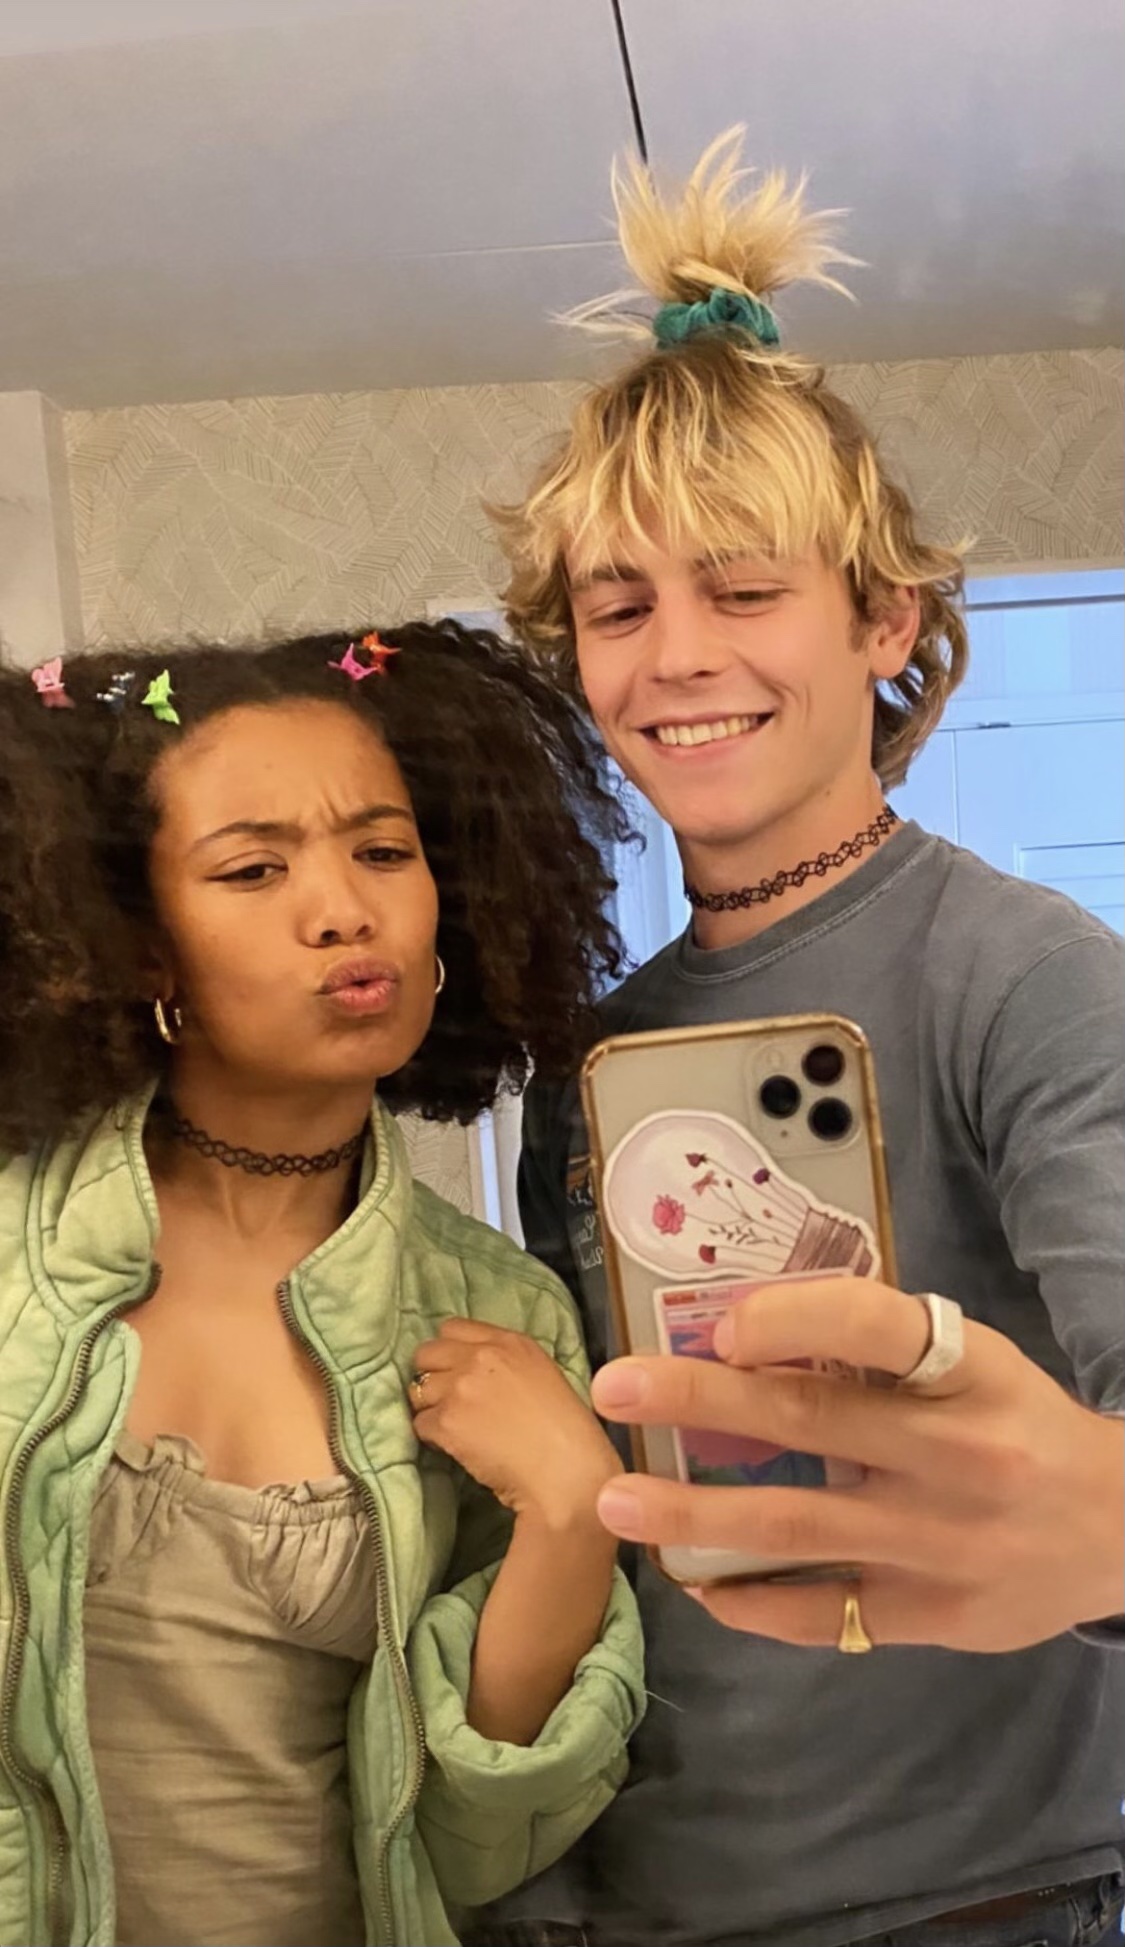 Ross Lynch and Jaz Sinclair Complete Relationship Timeline